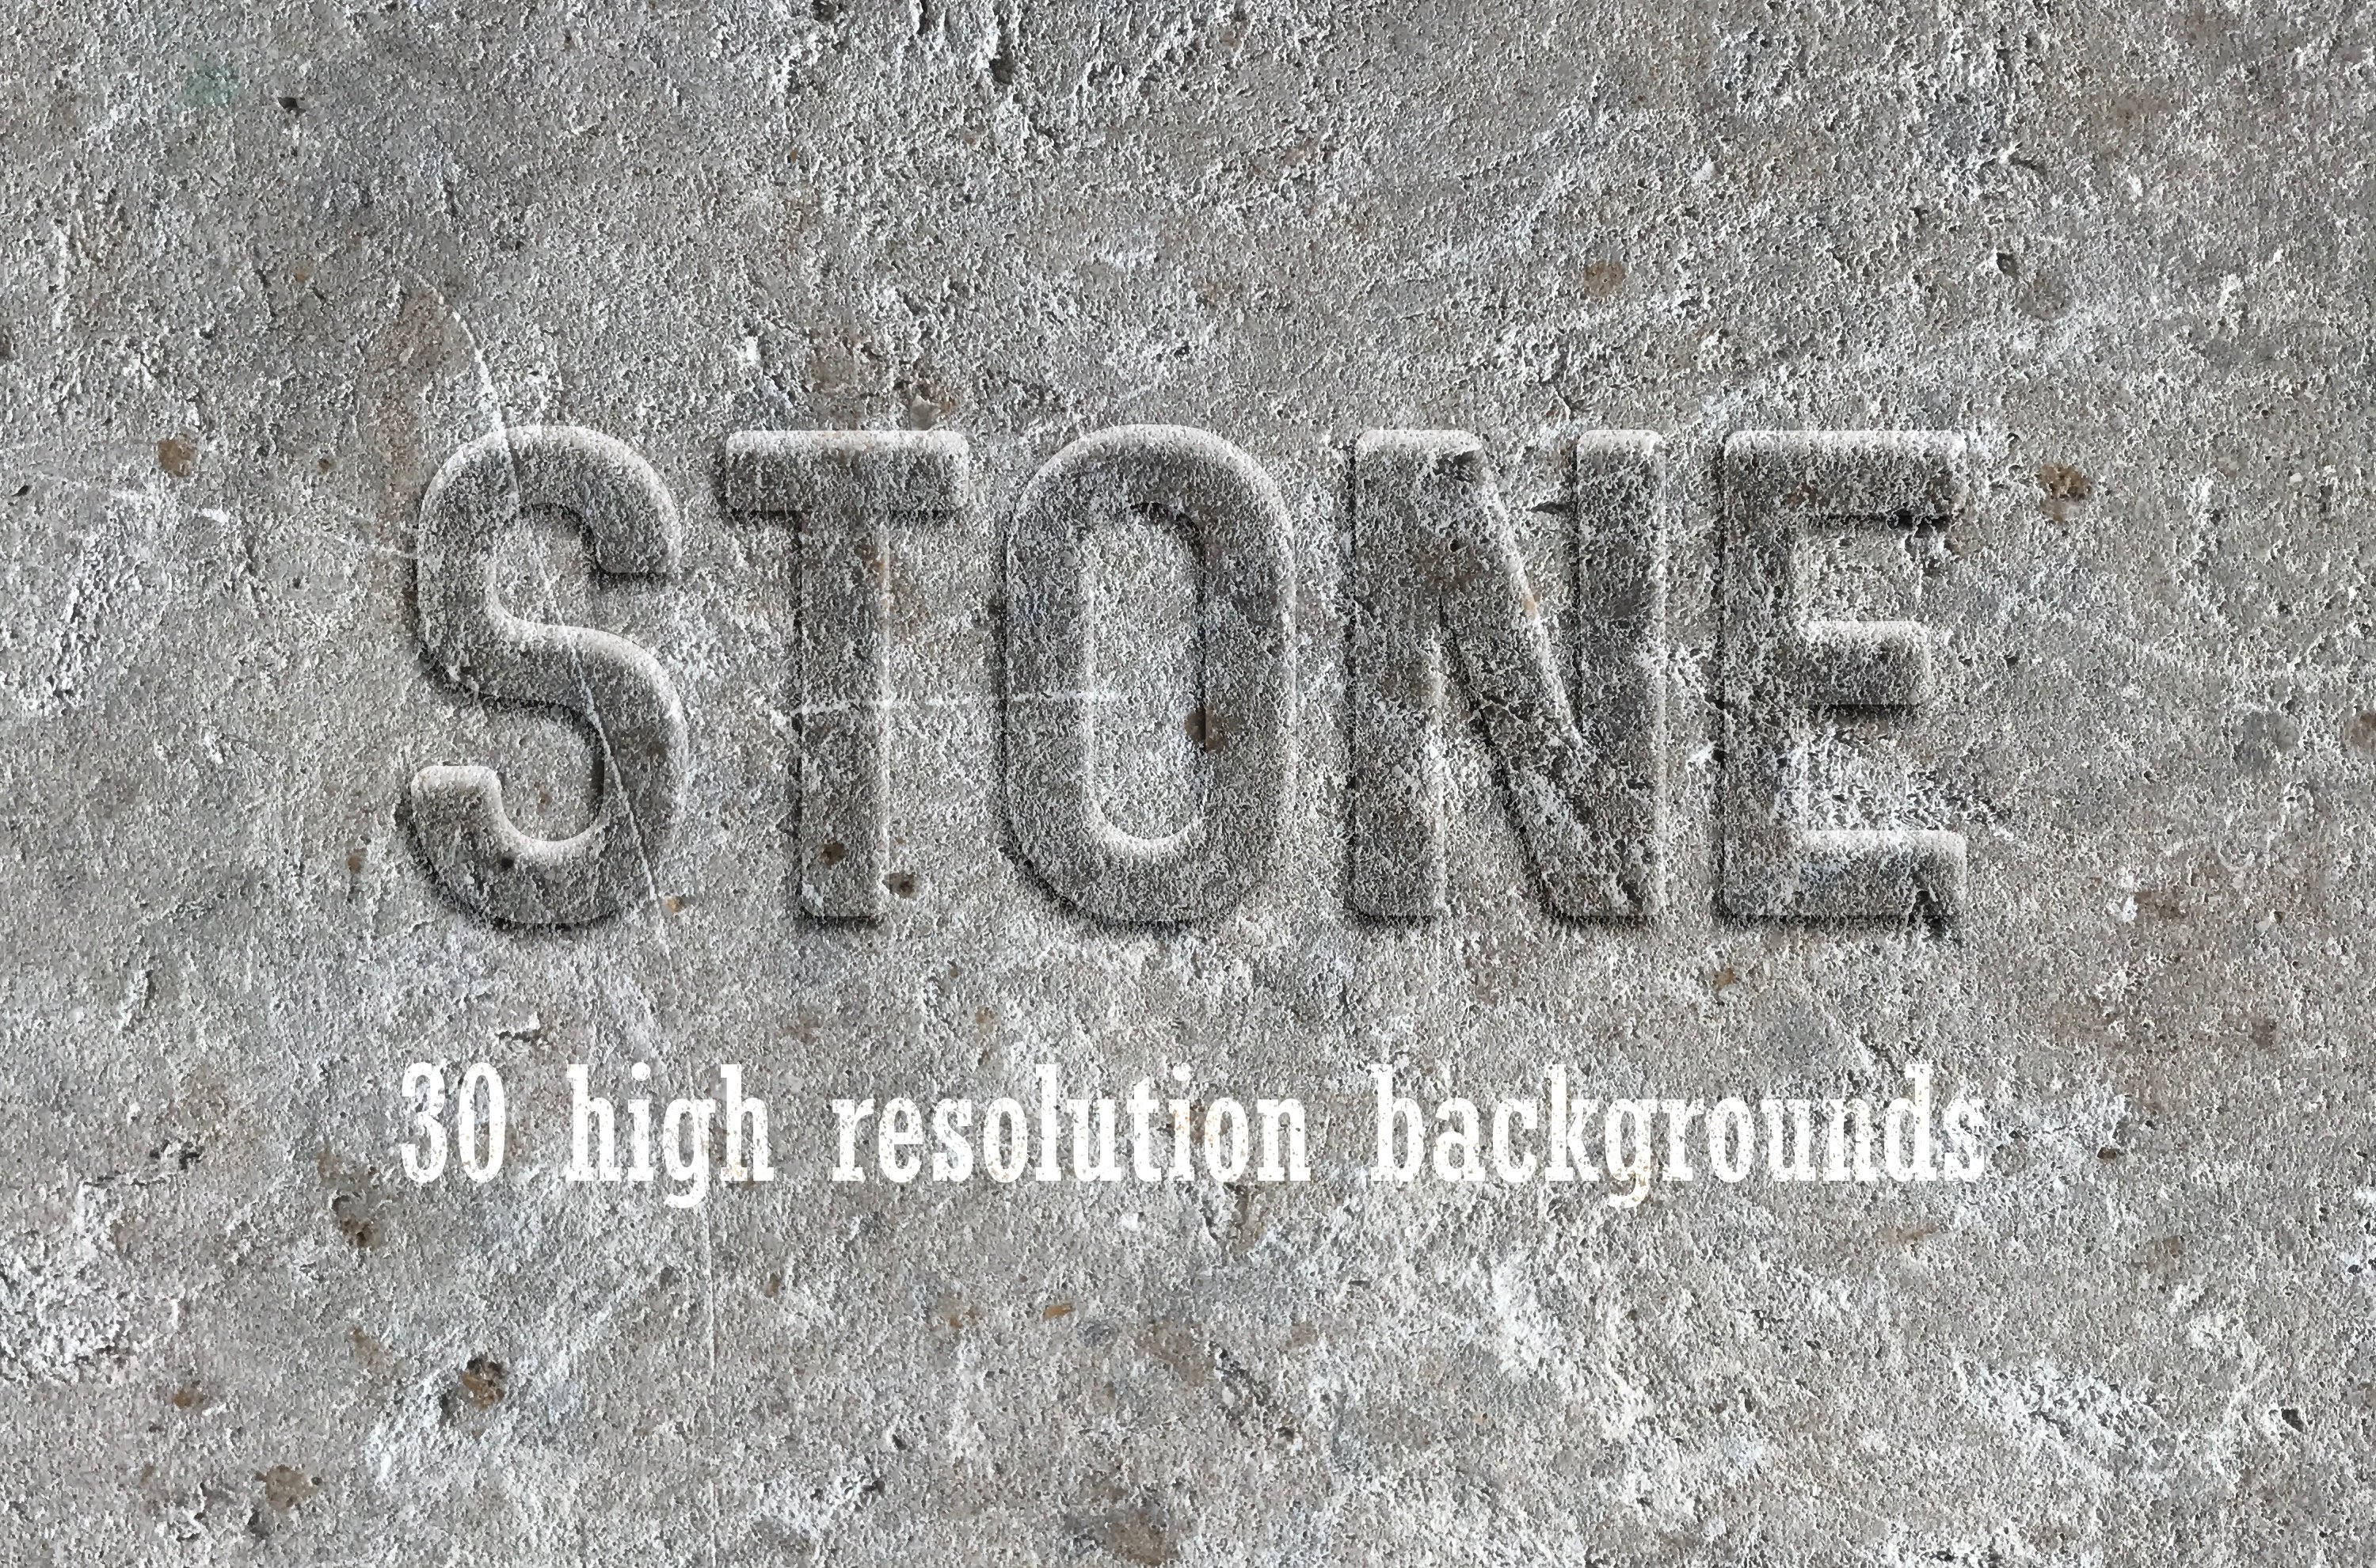 Stone textures cover image.